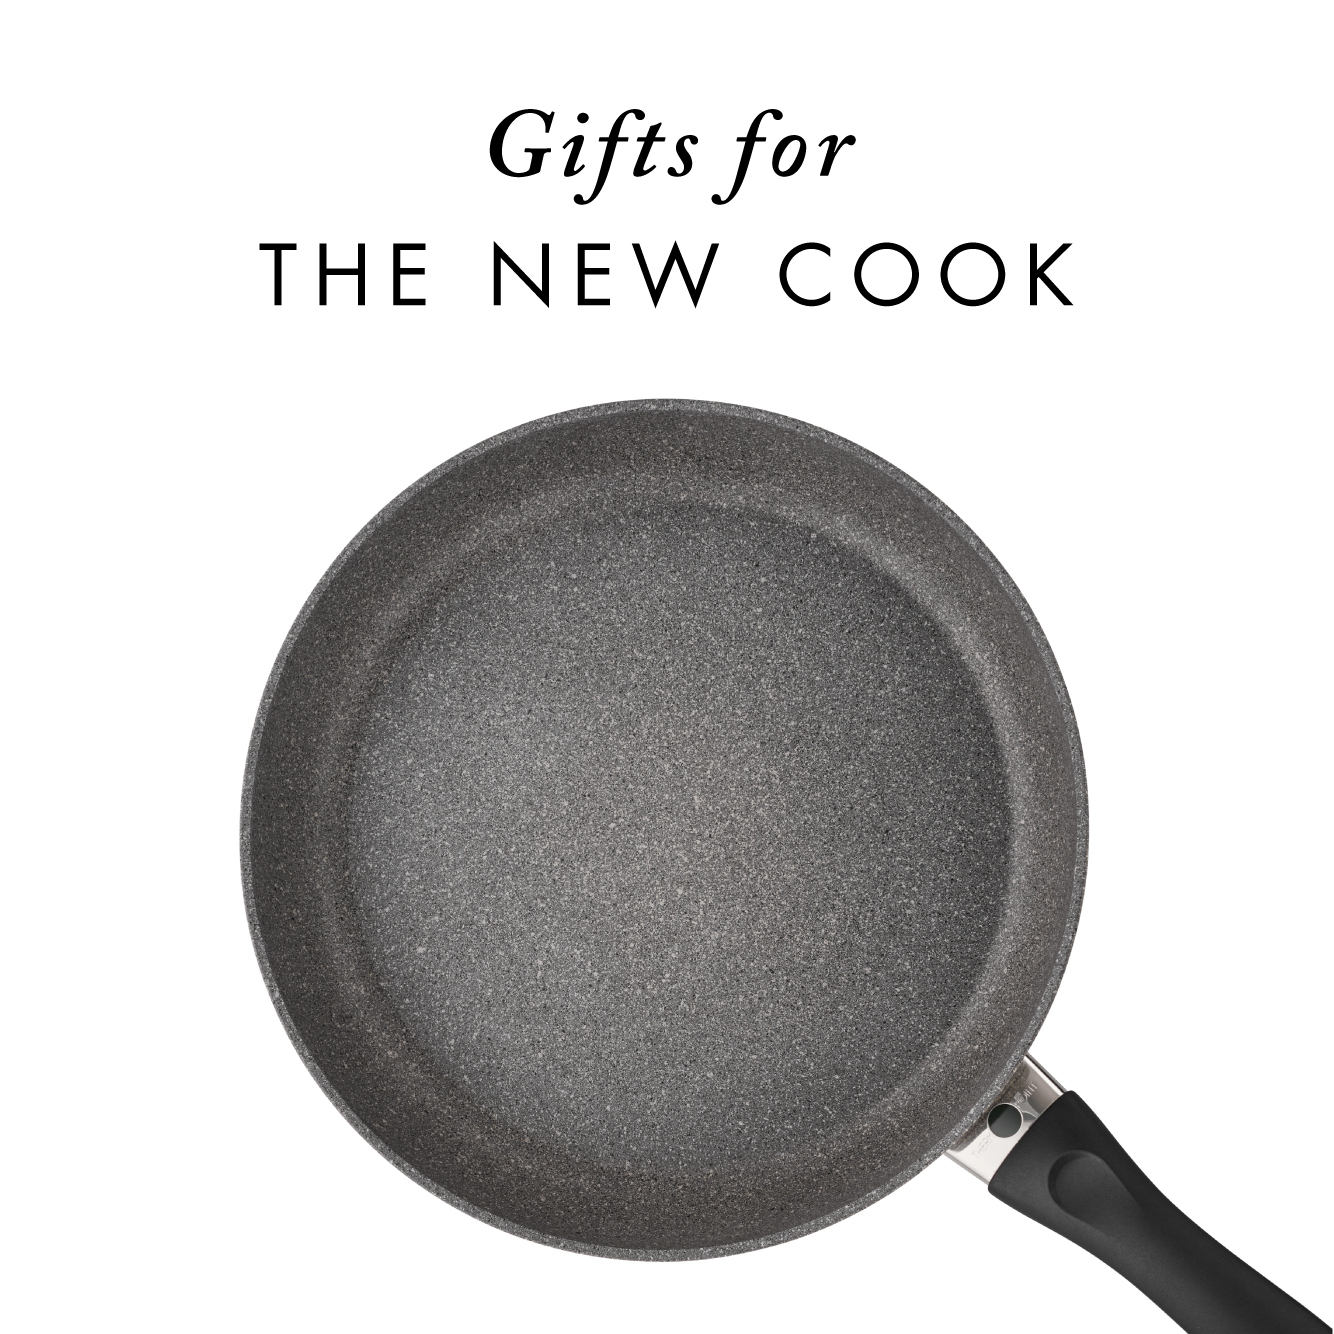 Gifts for the New Cook